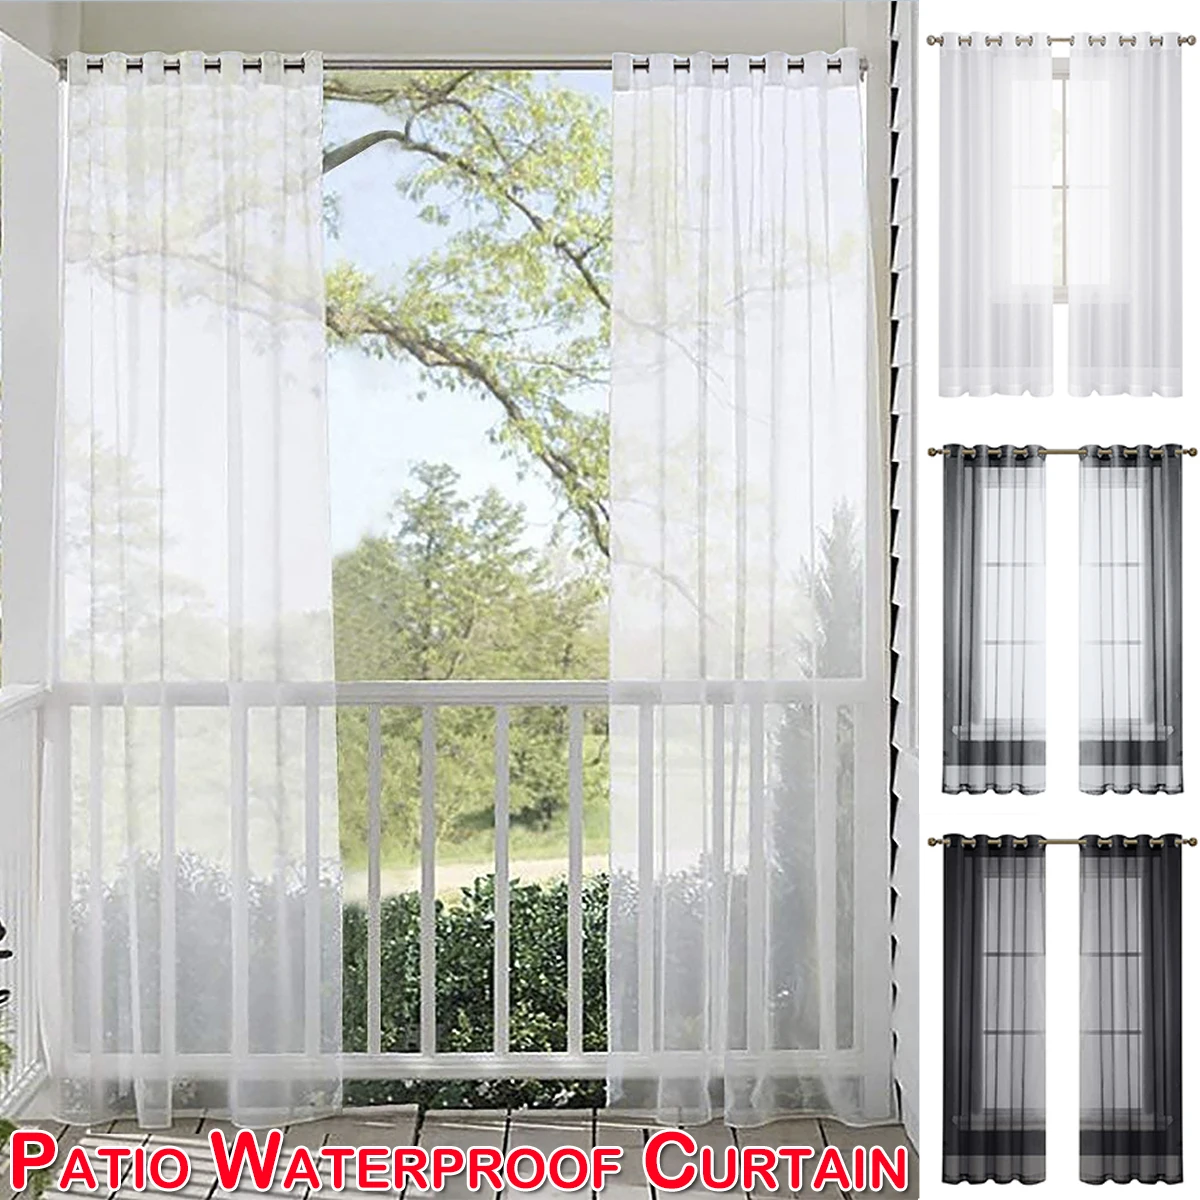 

Waterproof Curtain for Patio Voile Sheer Outdoor Porch Yard Curtain Home Décor for Lawn Garden Cordless Curtains for Living Room